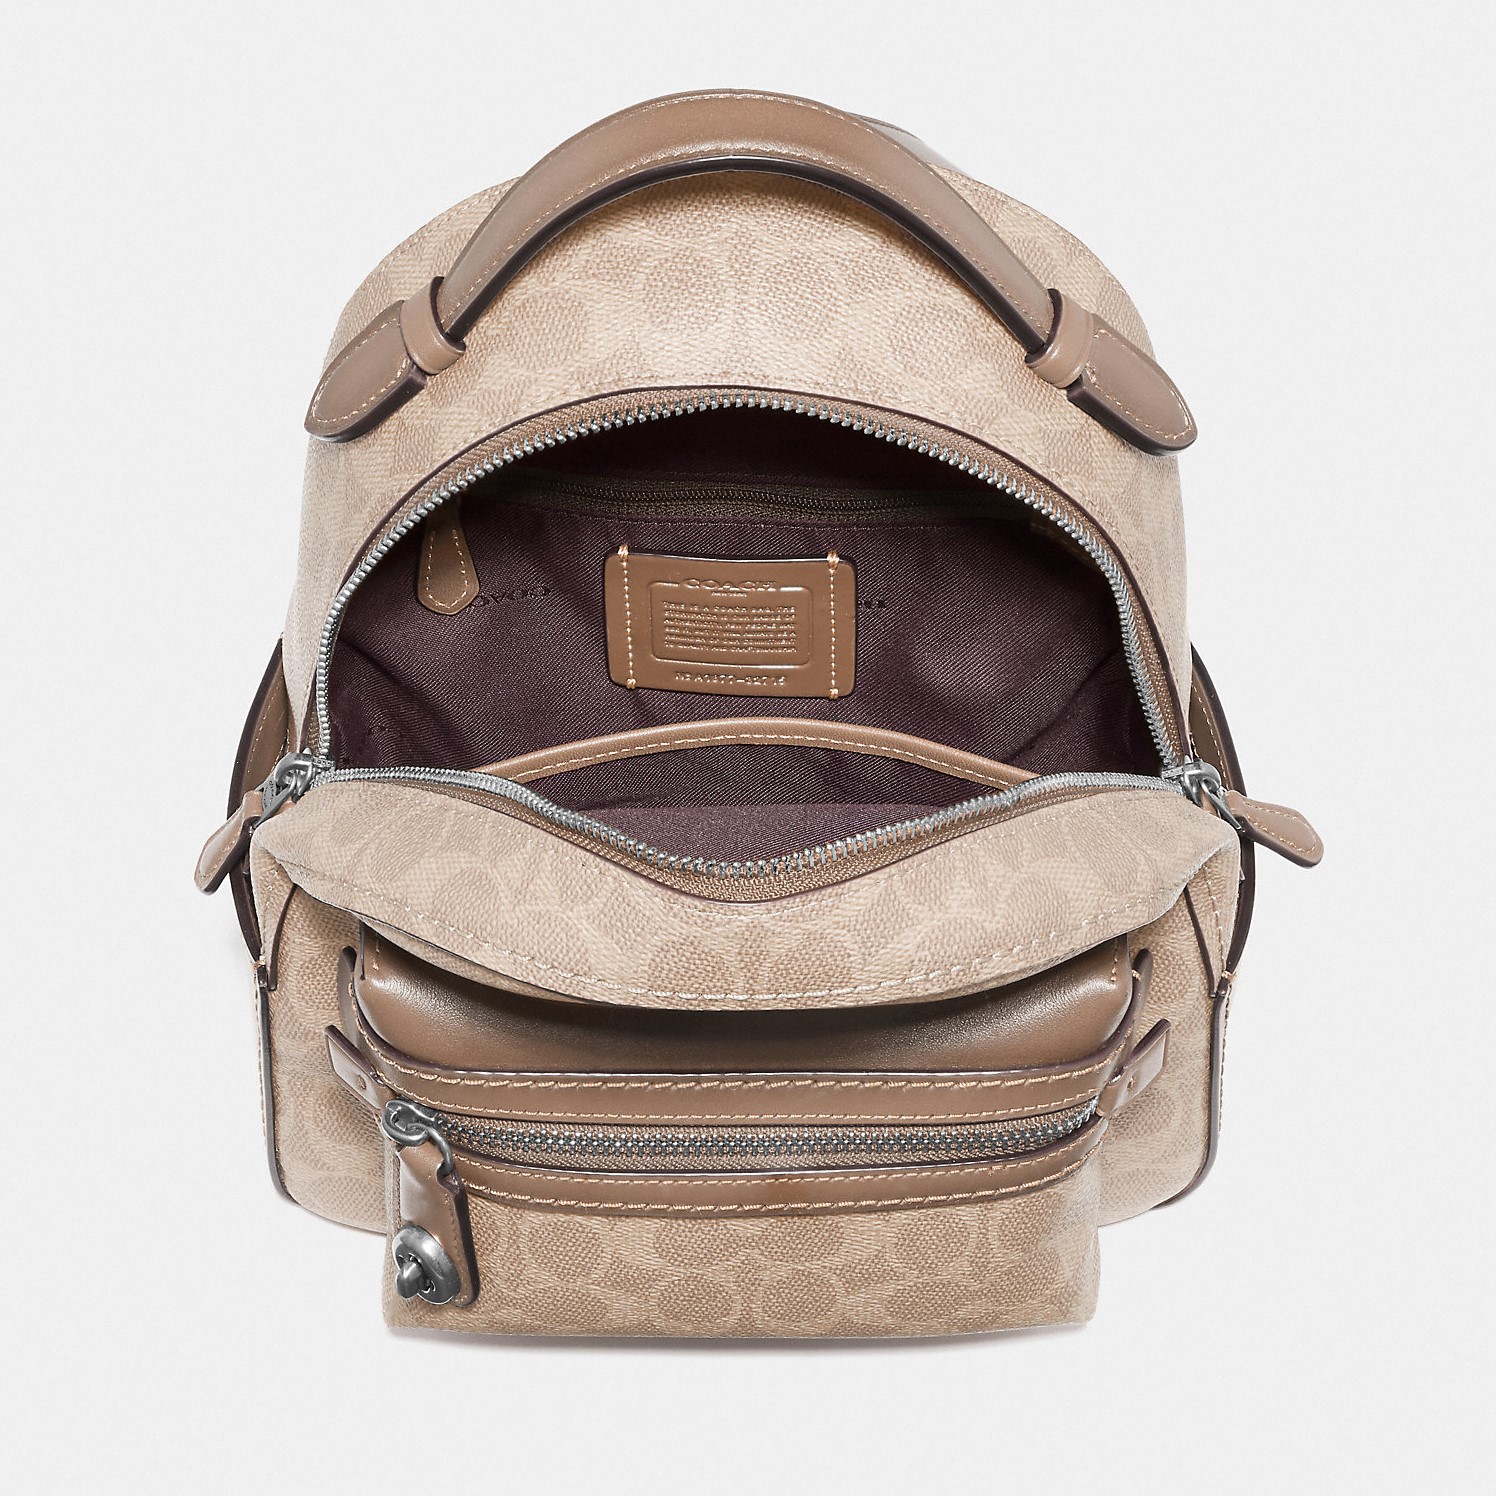 BALO NỮ COACH CAMPUS BACKPACK 23 IN SIGNATURE CANVAS TAN 9